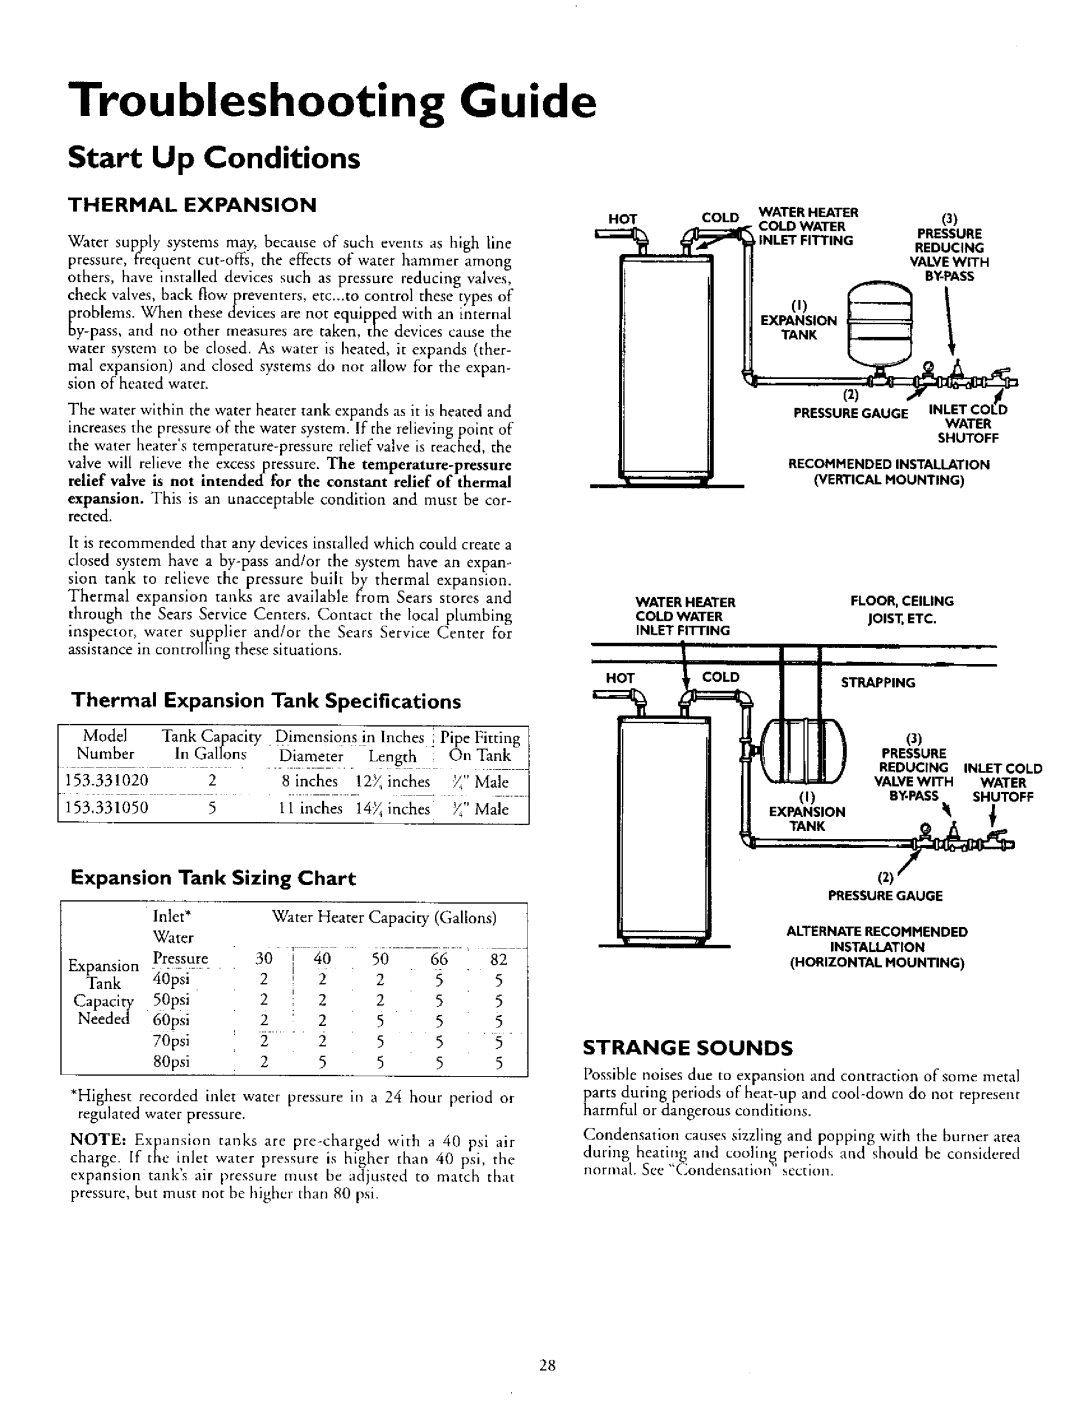 Kenmore 153.335862 Troubleshooting Guide, Start Up Conditions, Thermal Expansion Tank Specifications, WMale, PRESSUR gGAUG 